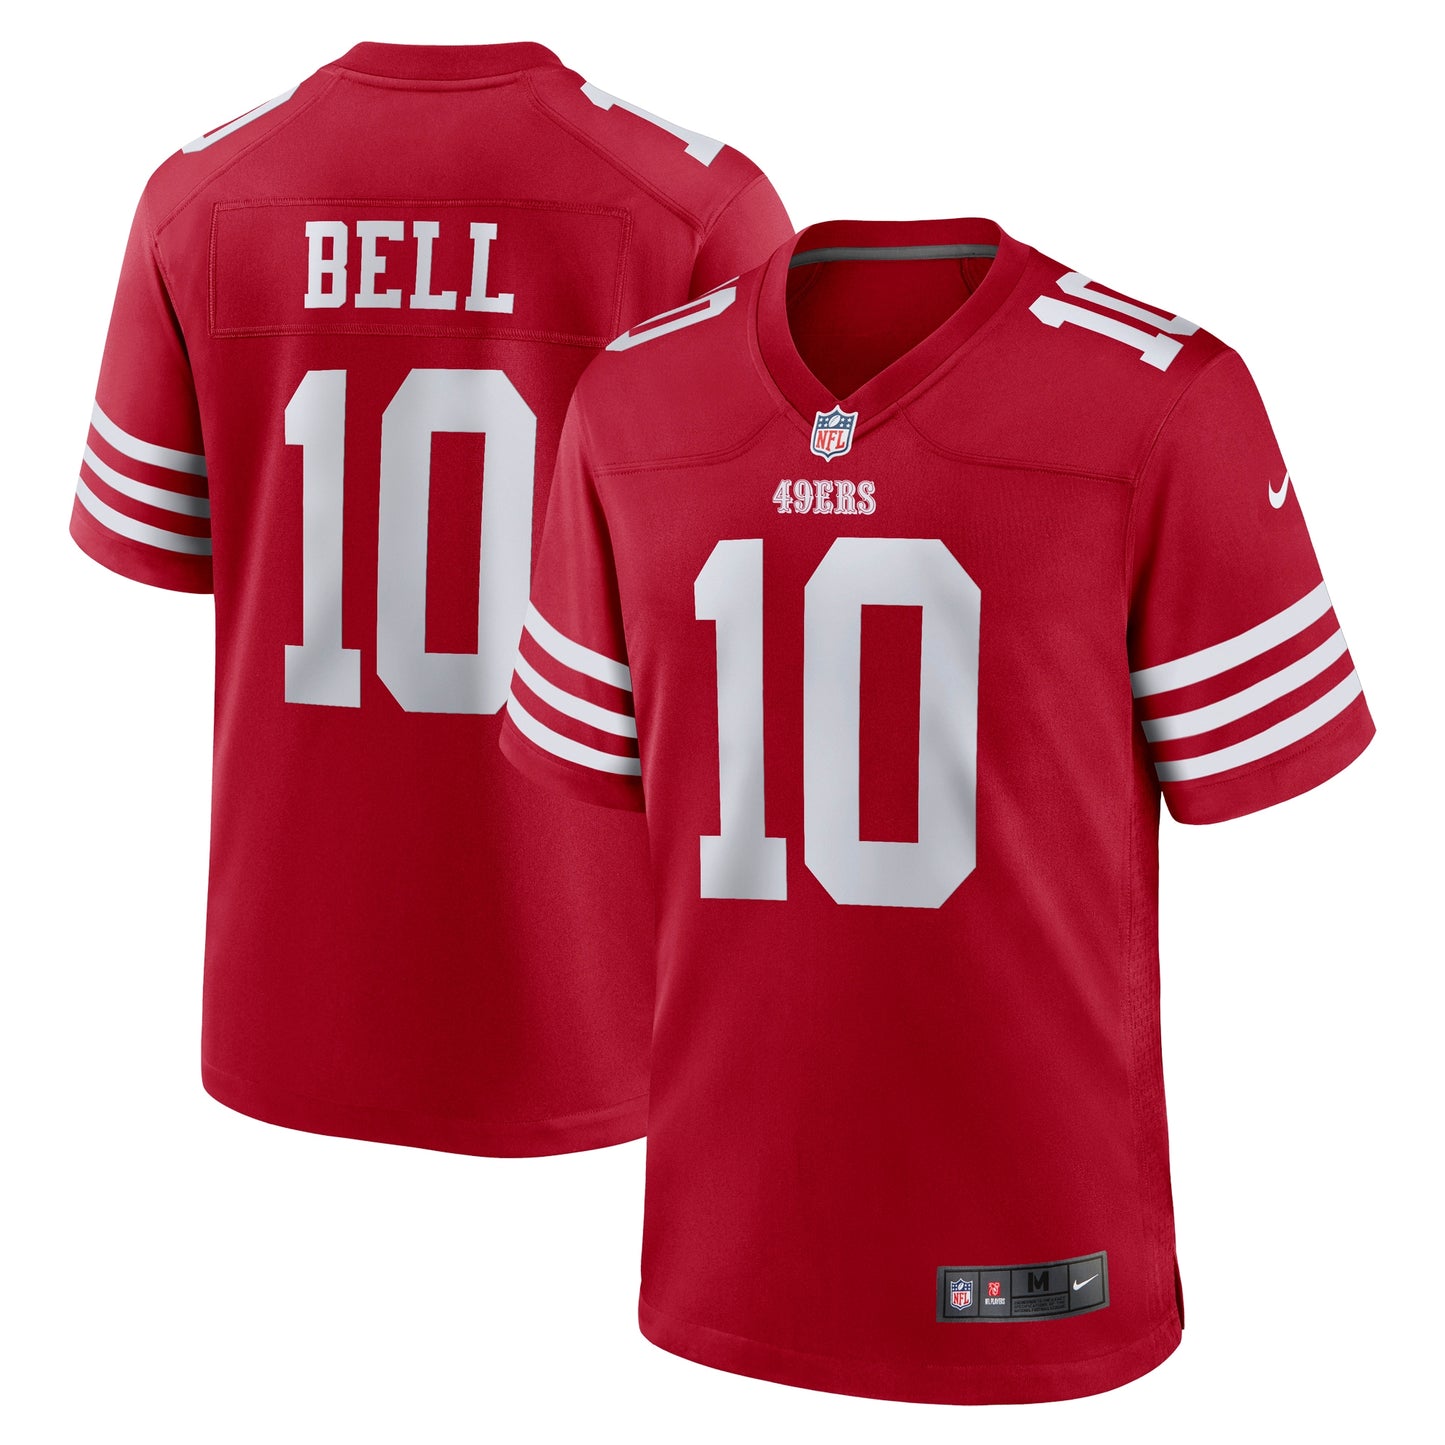 Ronnie Bell San Francisco 49ers Nike Team Game Jersey - Scarlet